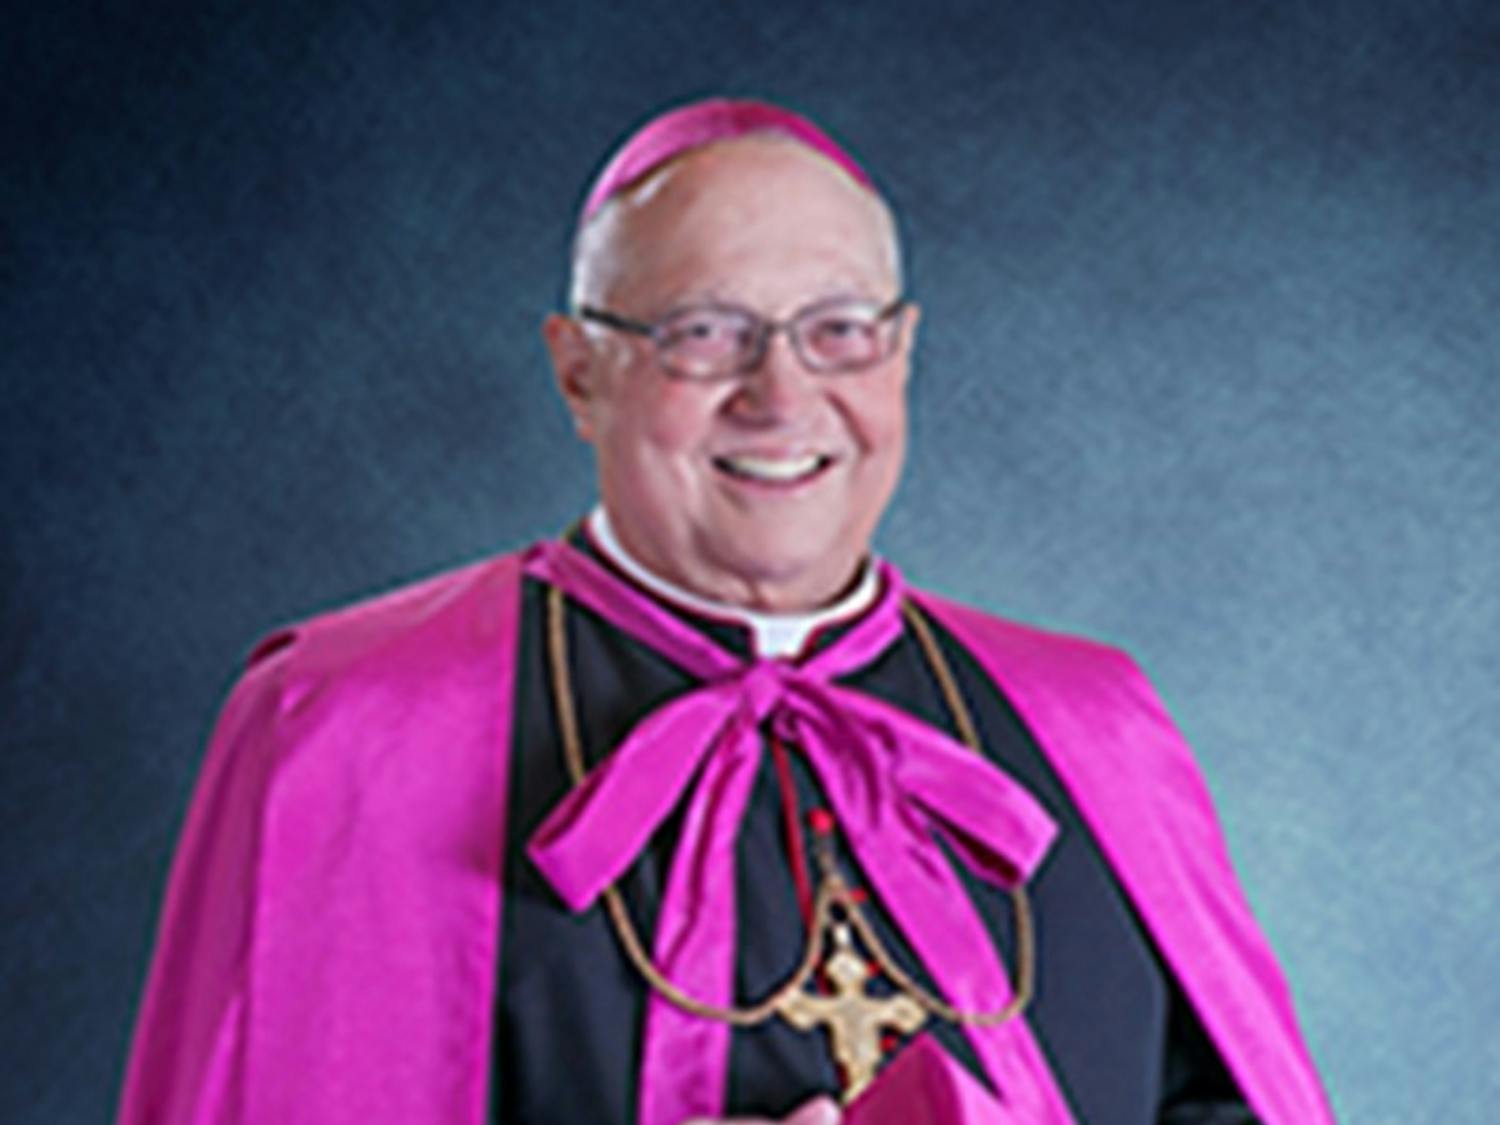 Bishop Robert Morlino came under fire last week after the Madison Catholic Diocese sent an email encouraging priests to think “thoroughly and prudently” about whether gay parishioners are eligible for funeral services.